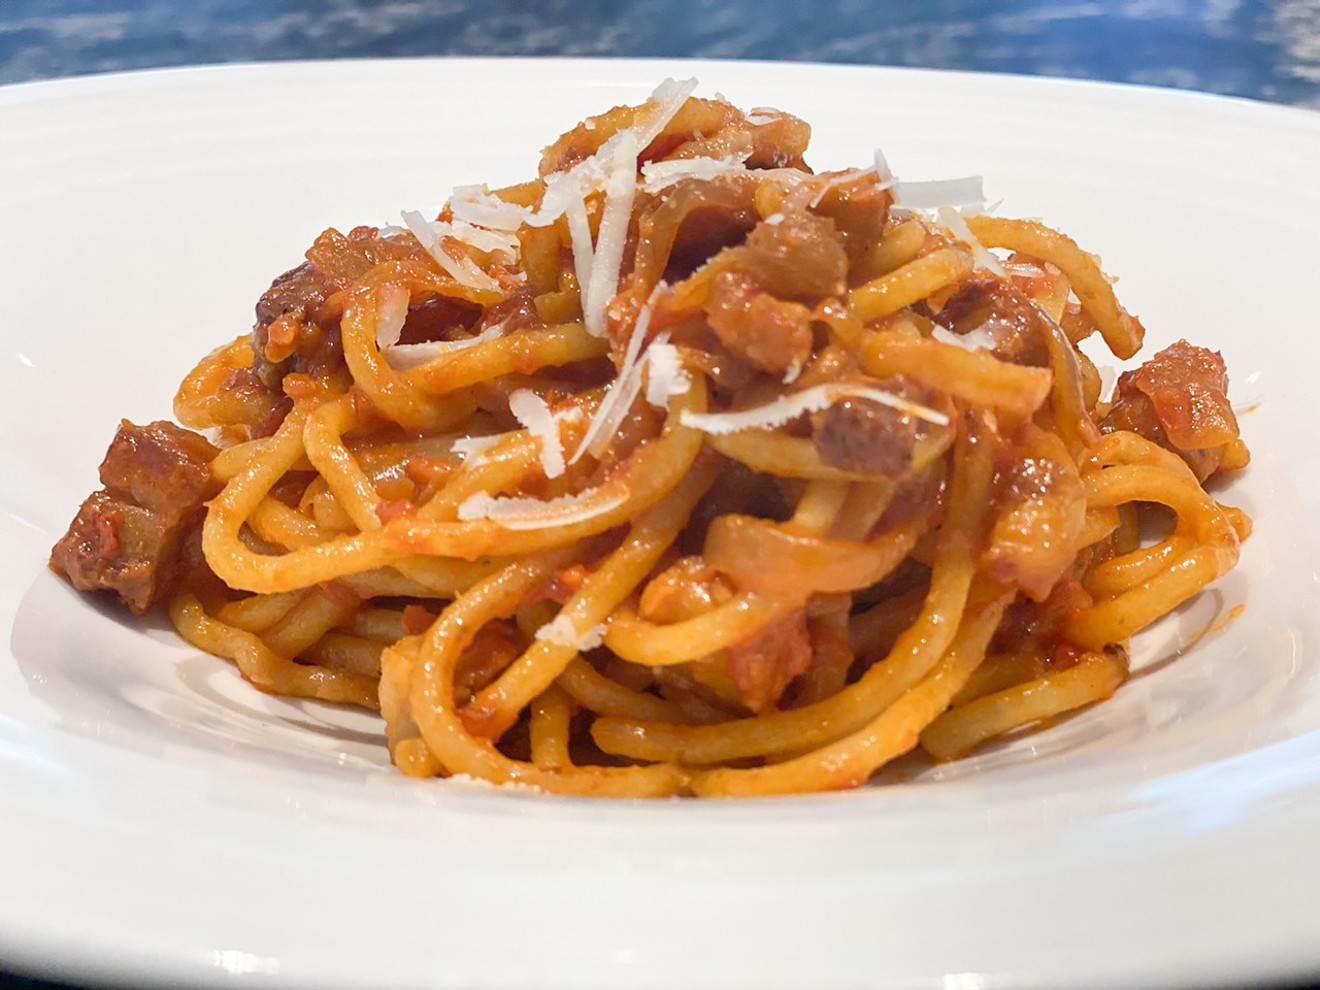 The bucatini amatriciana with pancetta, red chili flakes and pecorino for $20